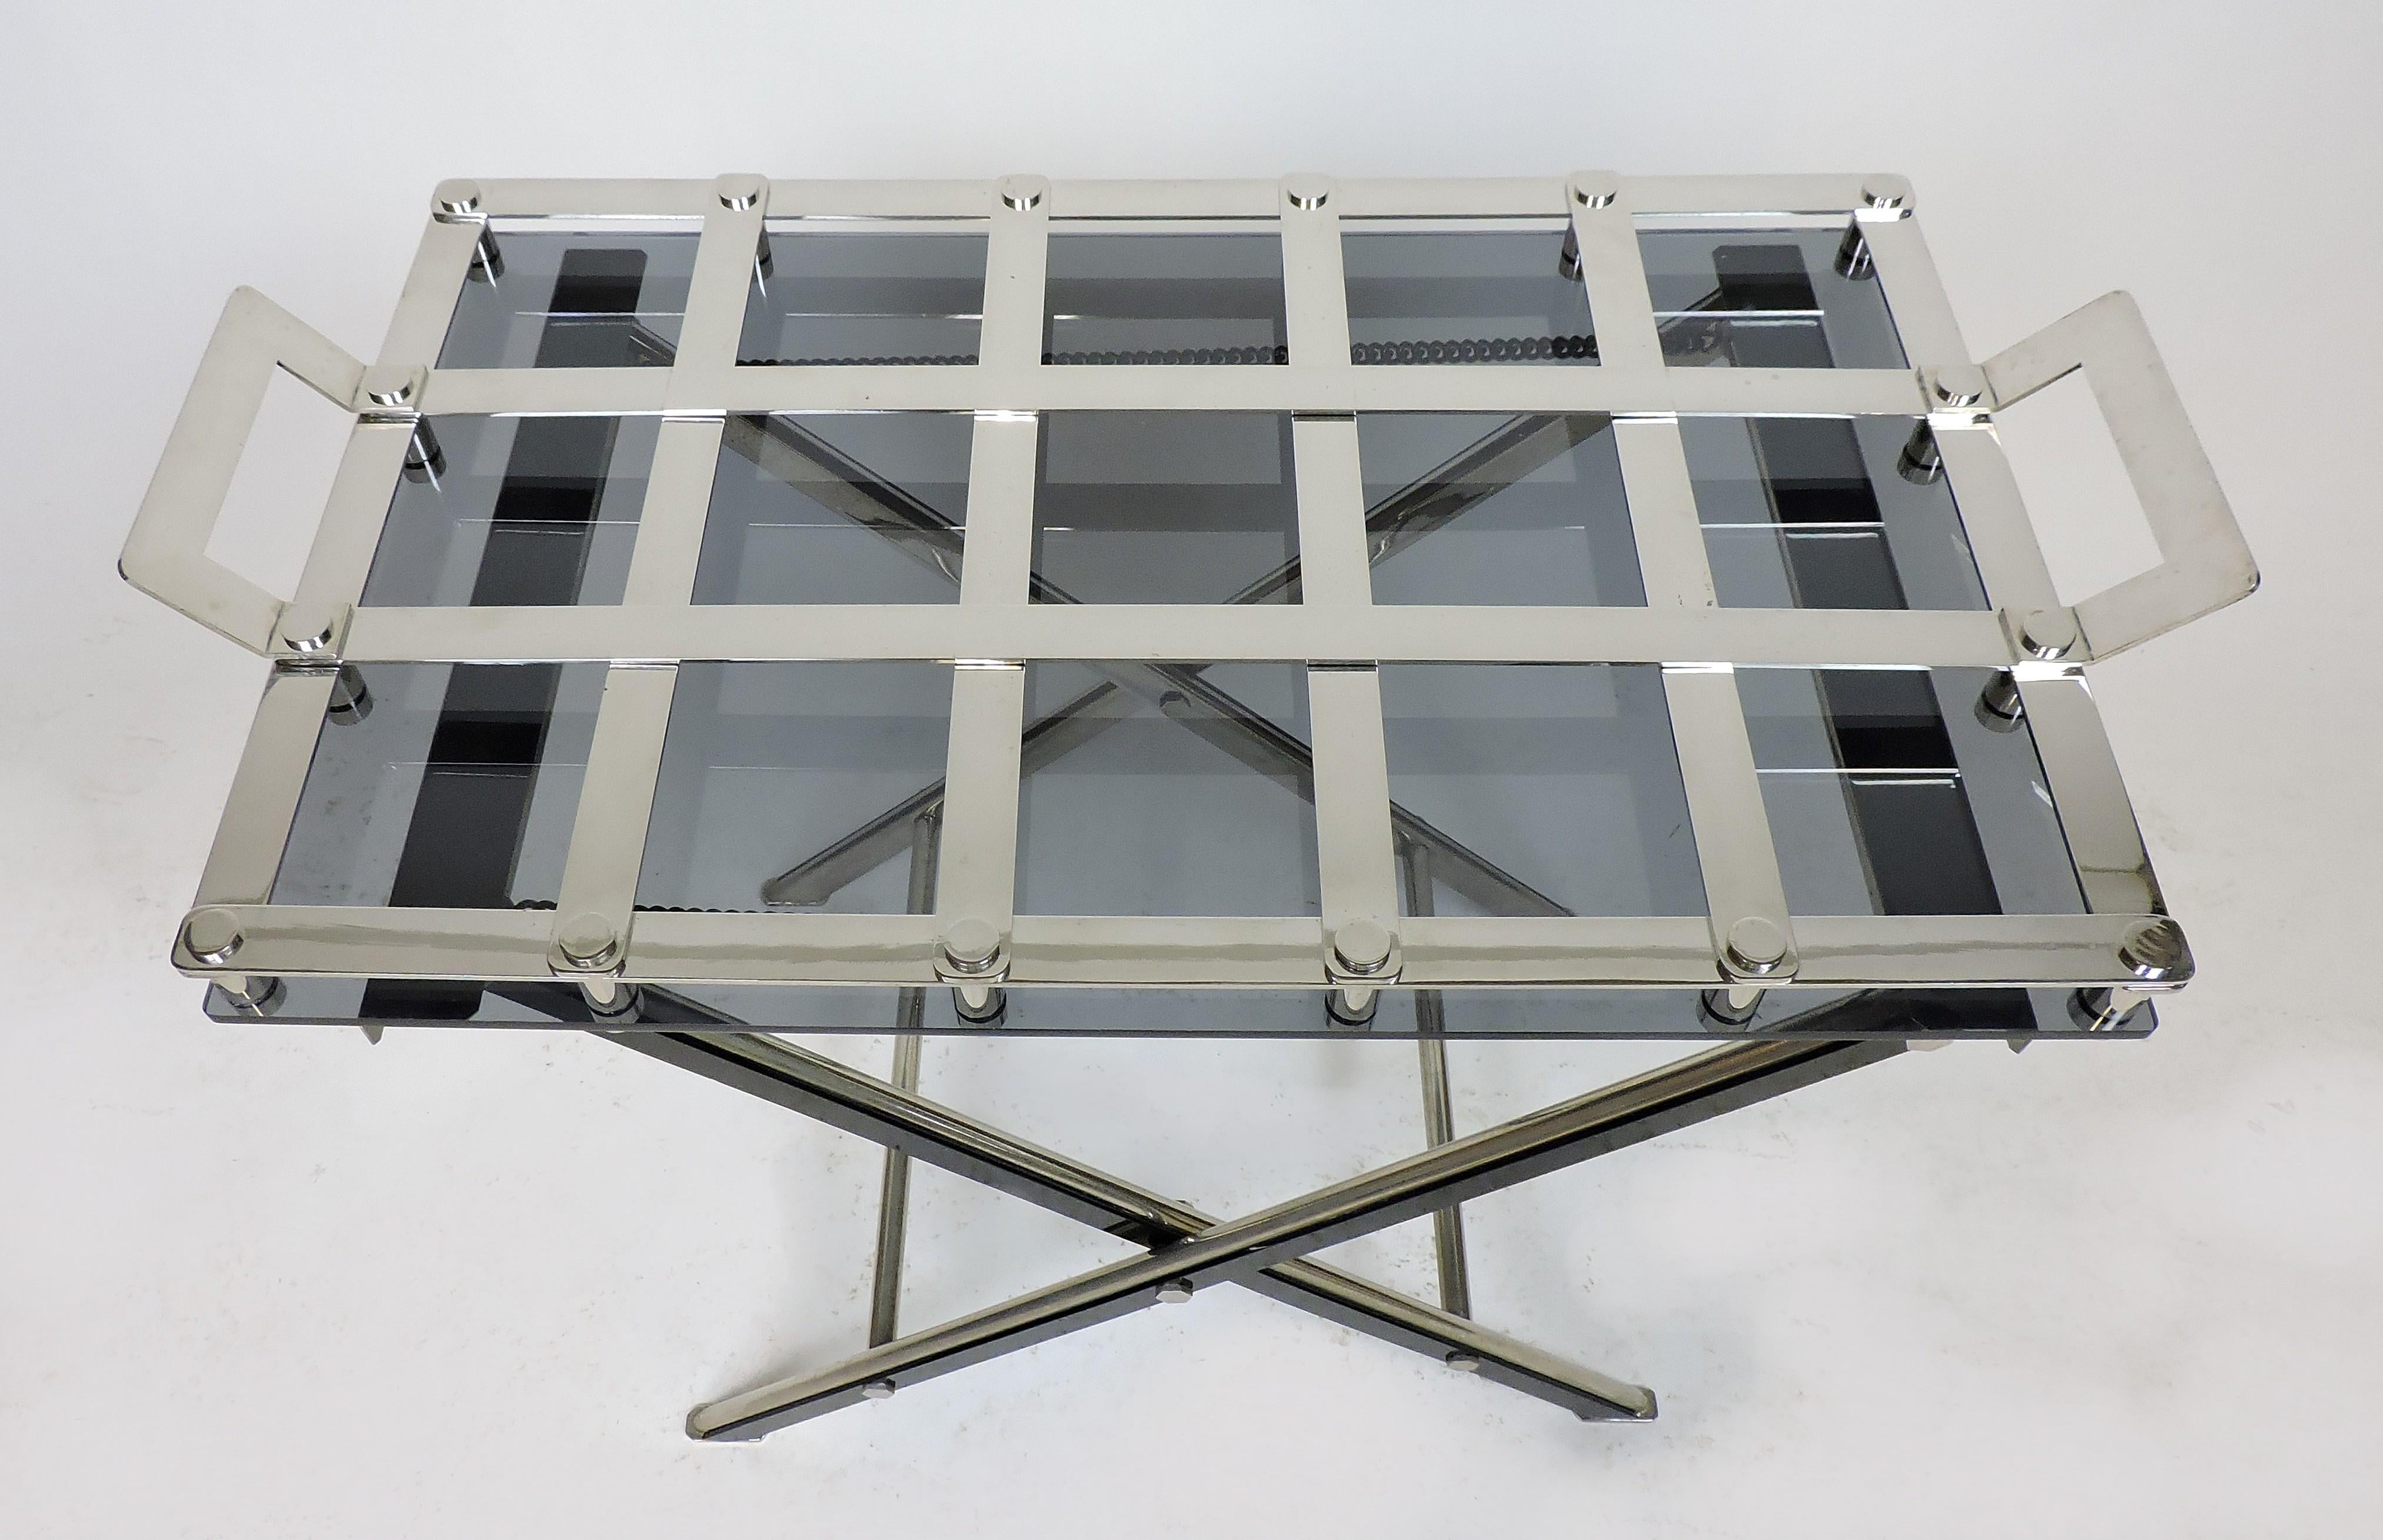 Handsome Willy Rizzo style butlers tray with stand, made of chrome-plated steel. The tray has a a gray Lucite bottom and the stand has black Lucite accents. The tray has two handles and grid openings to place glasses, and the stand can be folded.
 